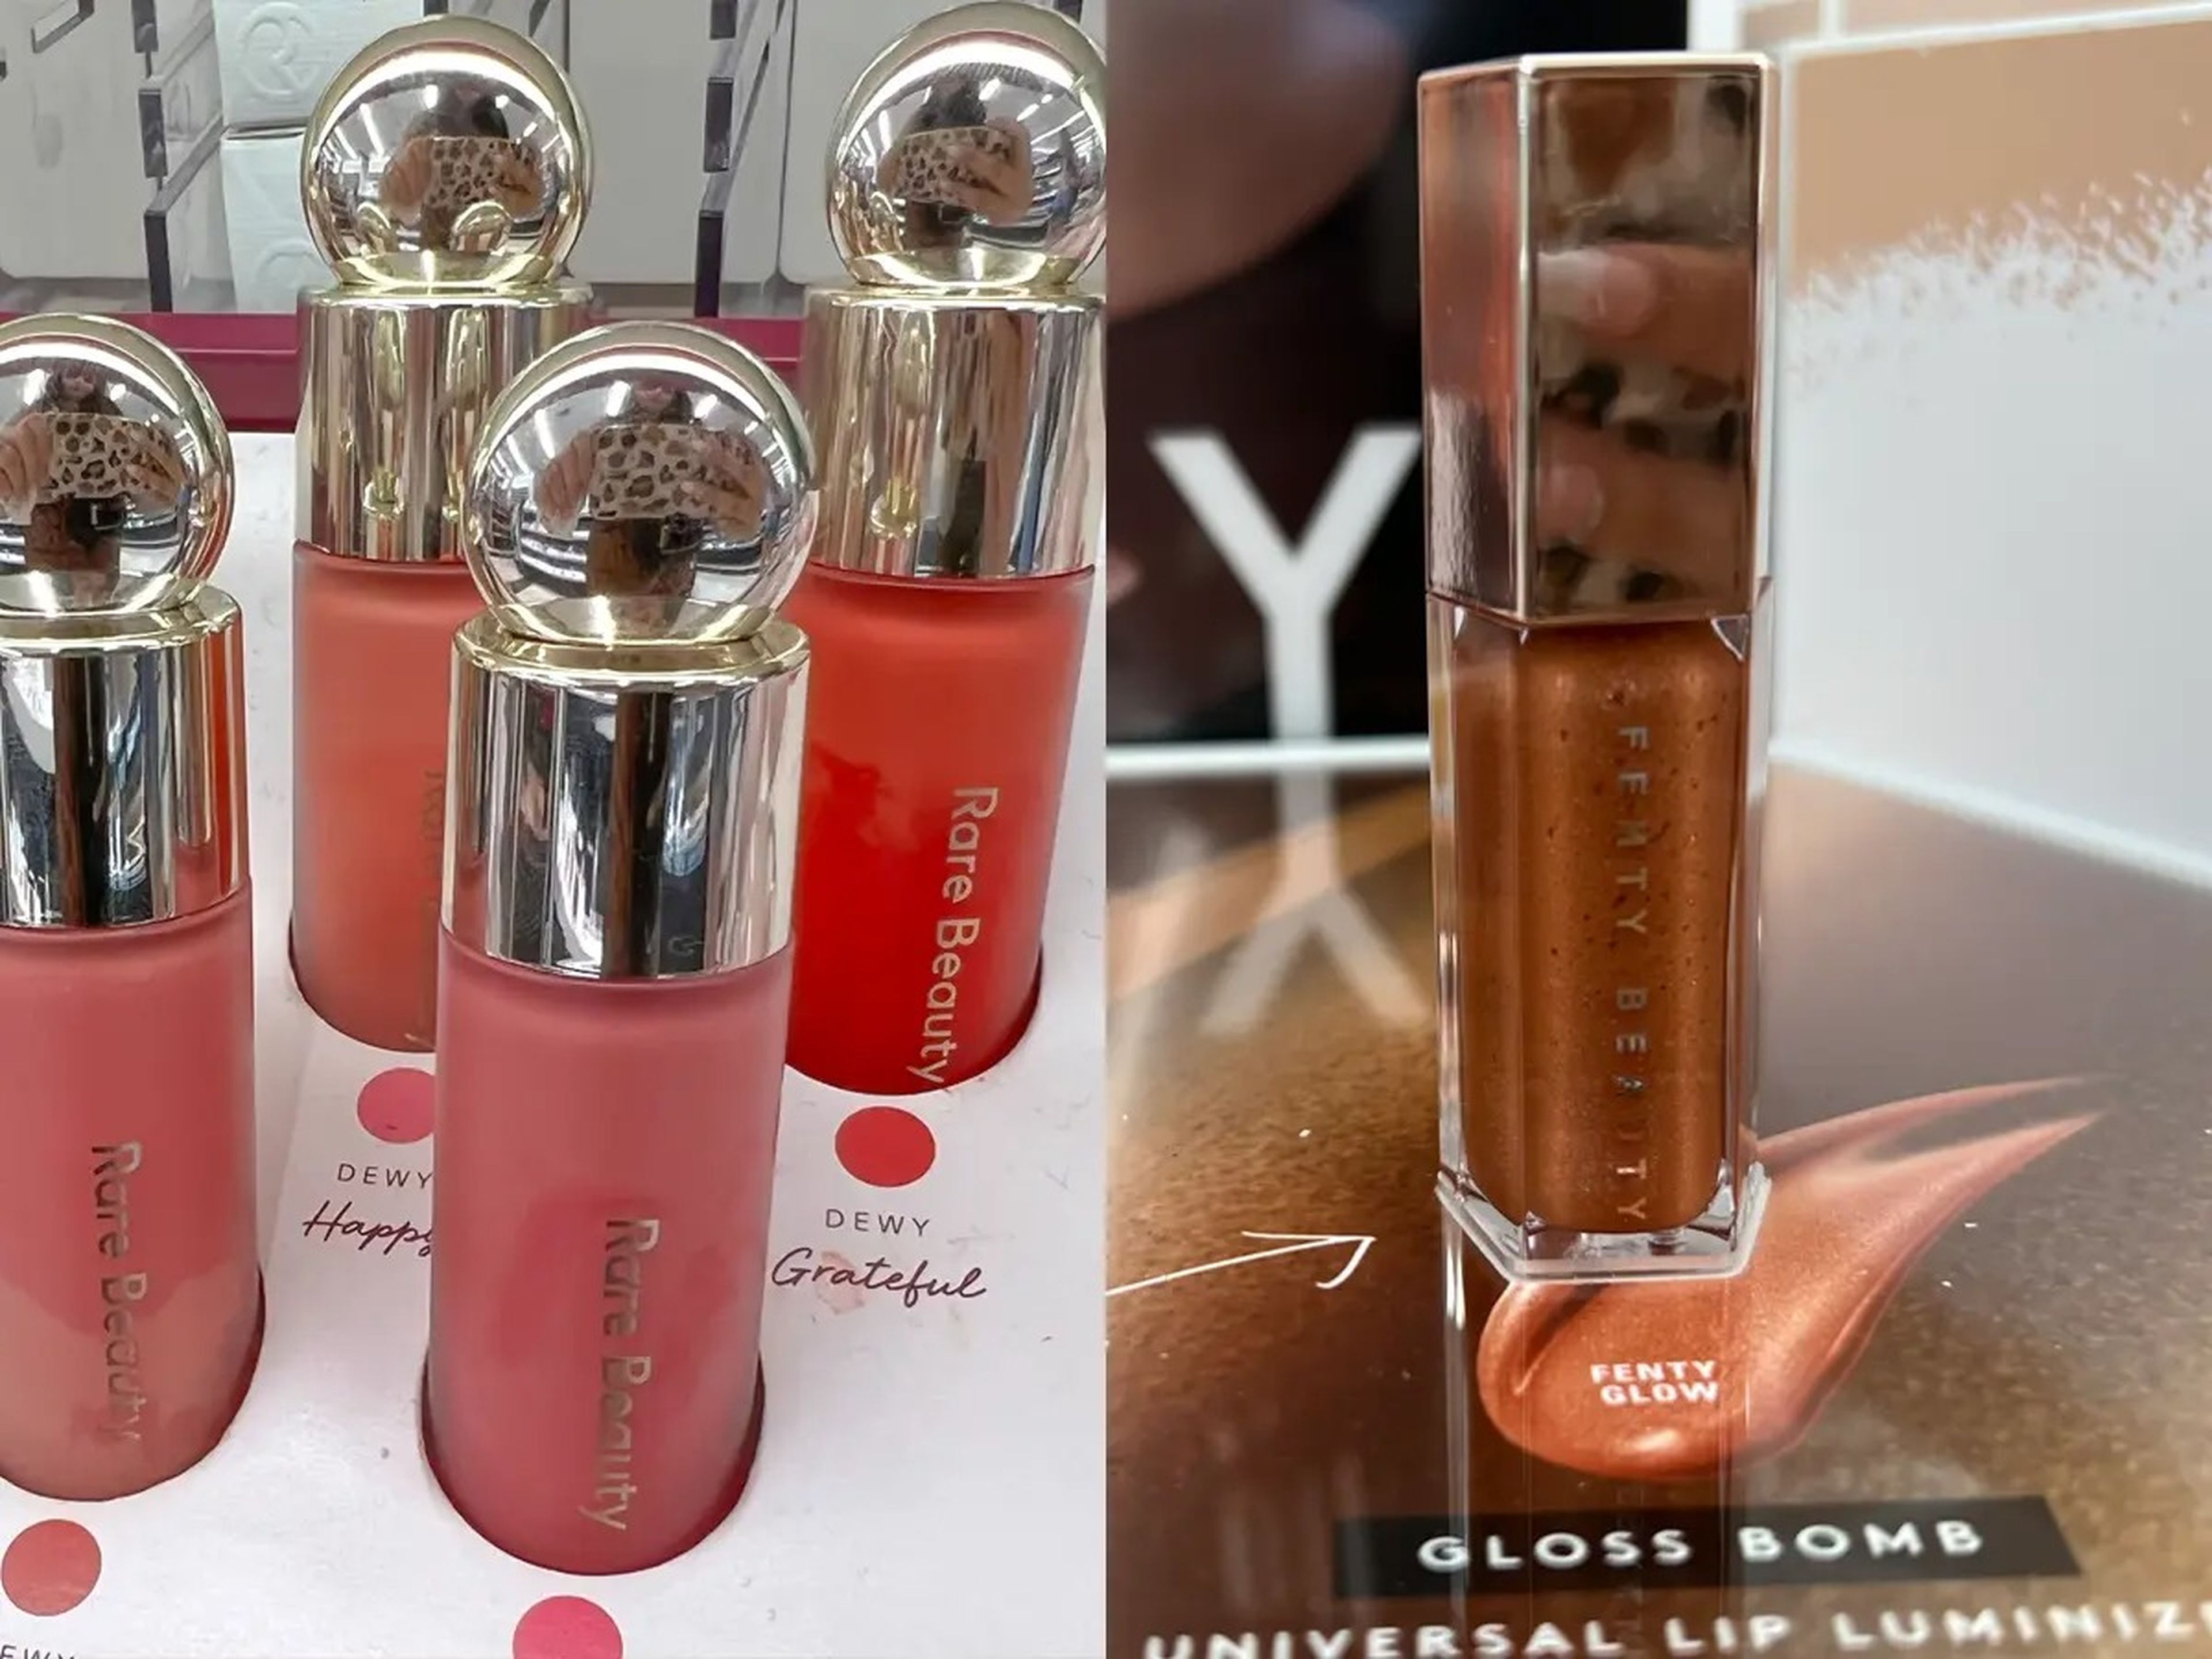 Rare Beauty liquid blushes on display at Sephora; Fenty Beauty Gloss Bomb in Fenty Glow on display at Sephora